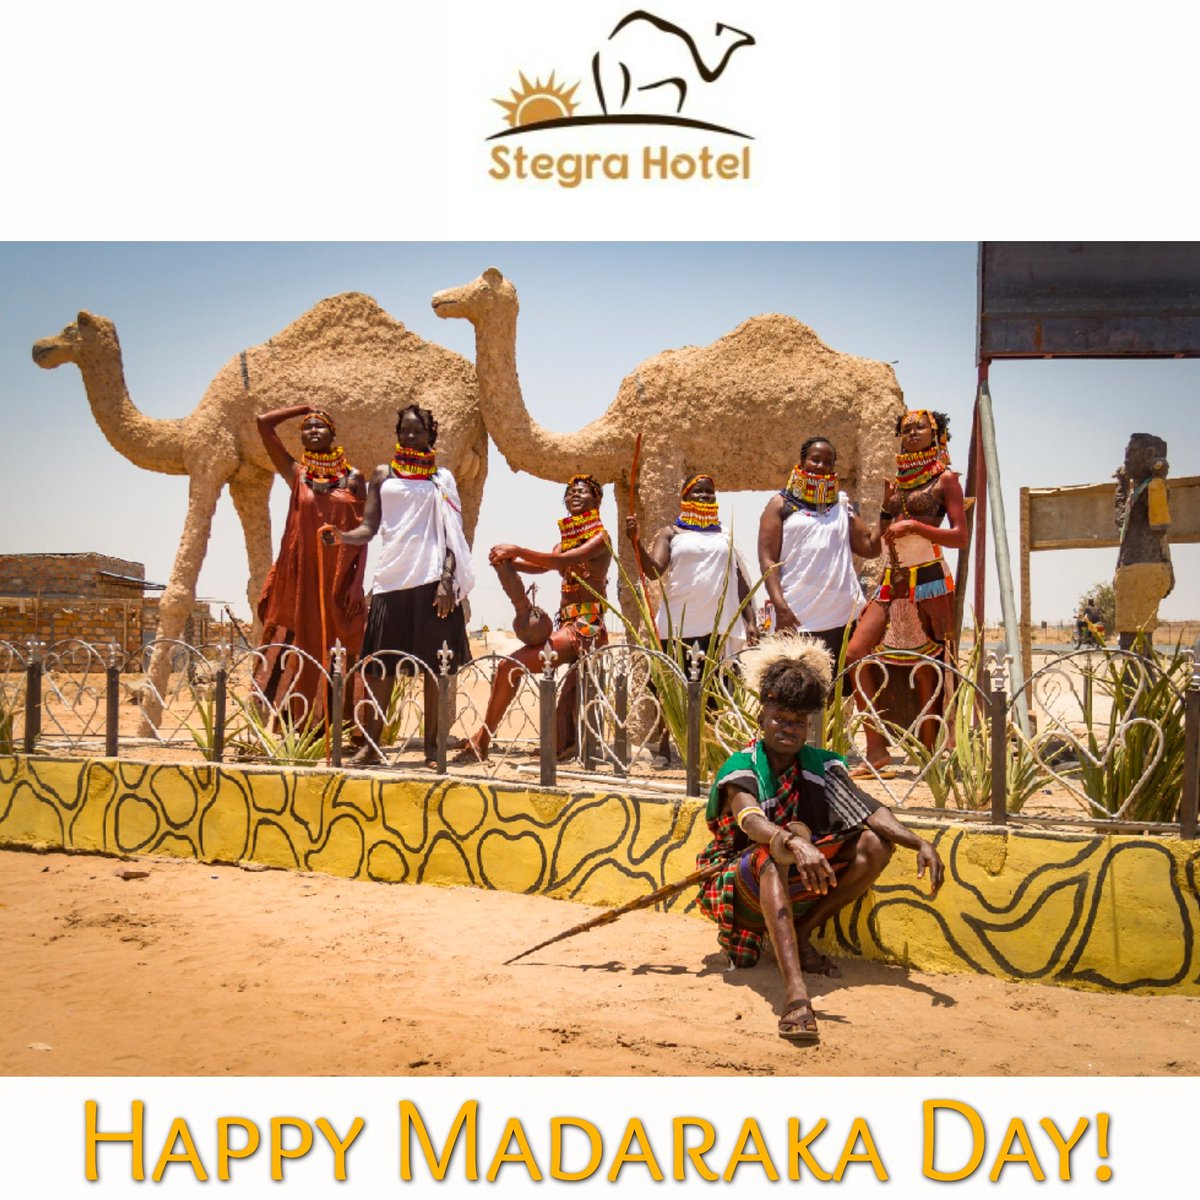 Happy Madaraka Day to all our beloved customers. Here's to freedom and soon enough freedom from #COVID19 as well.  #MadarakaDay #MadarakaDay2020 #VisitStegra